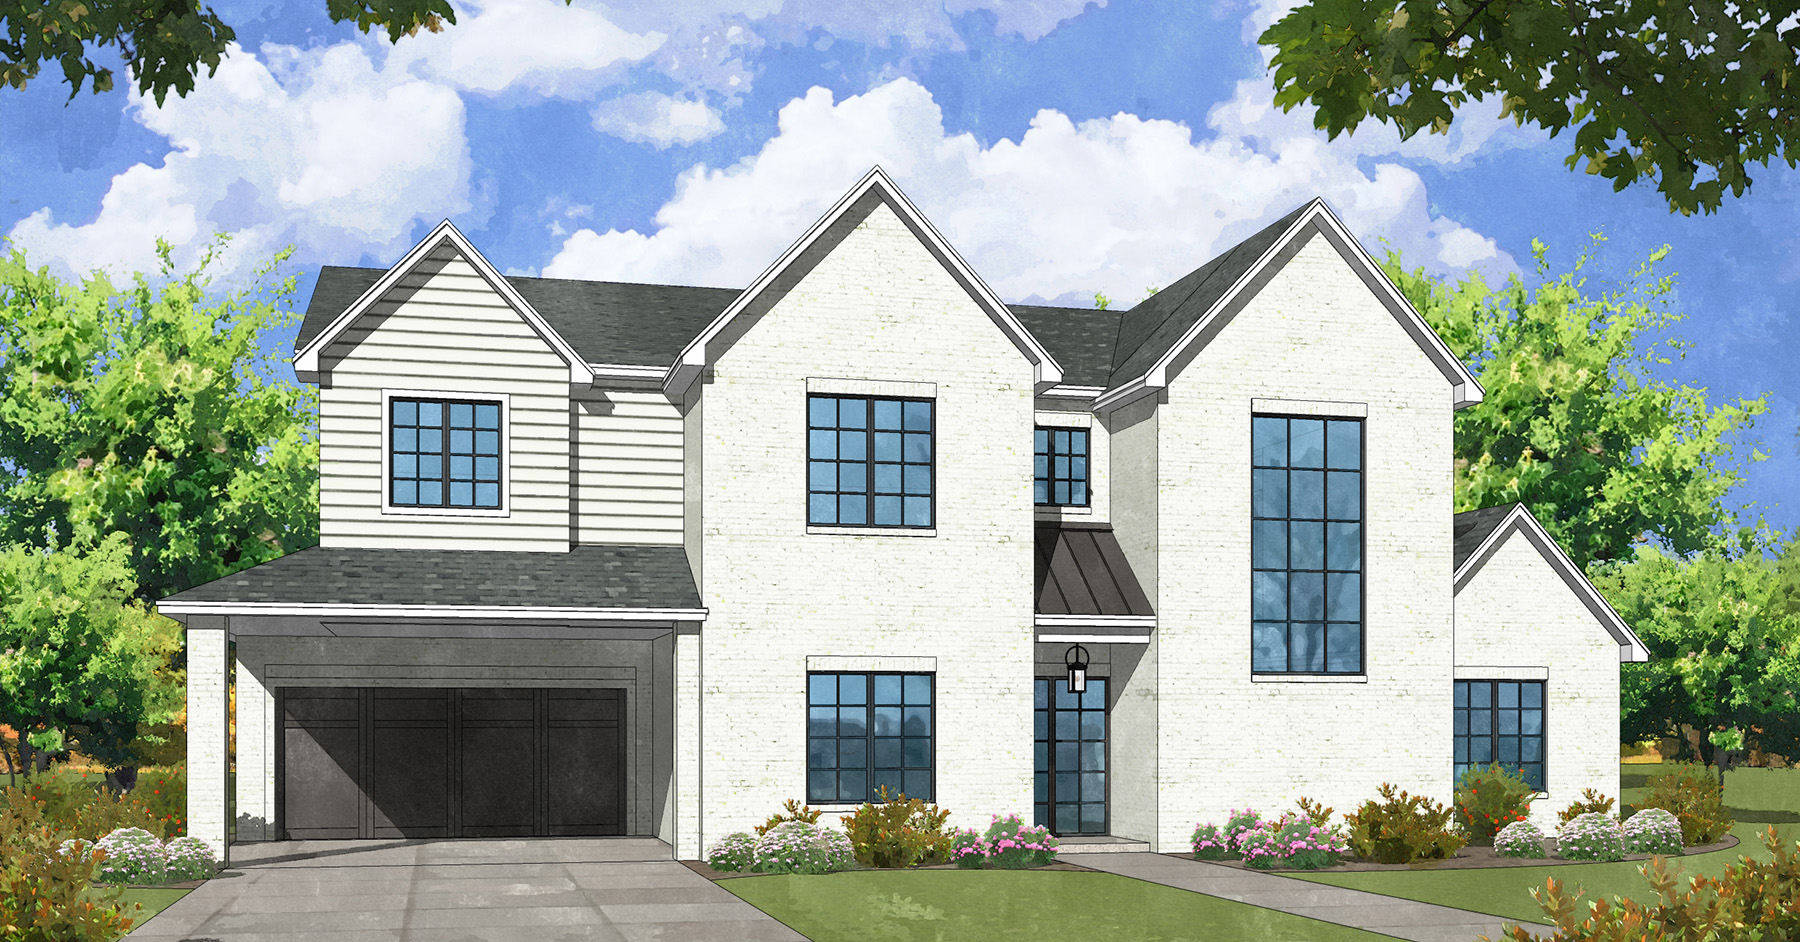 Briargrove<br/>Custom Home, Completion Spring 2023<br/>6248 Willers Way, Houston, TX 77057